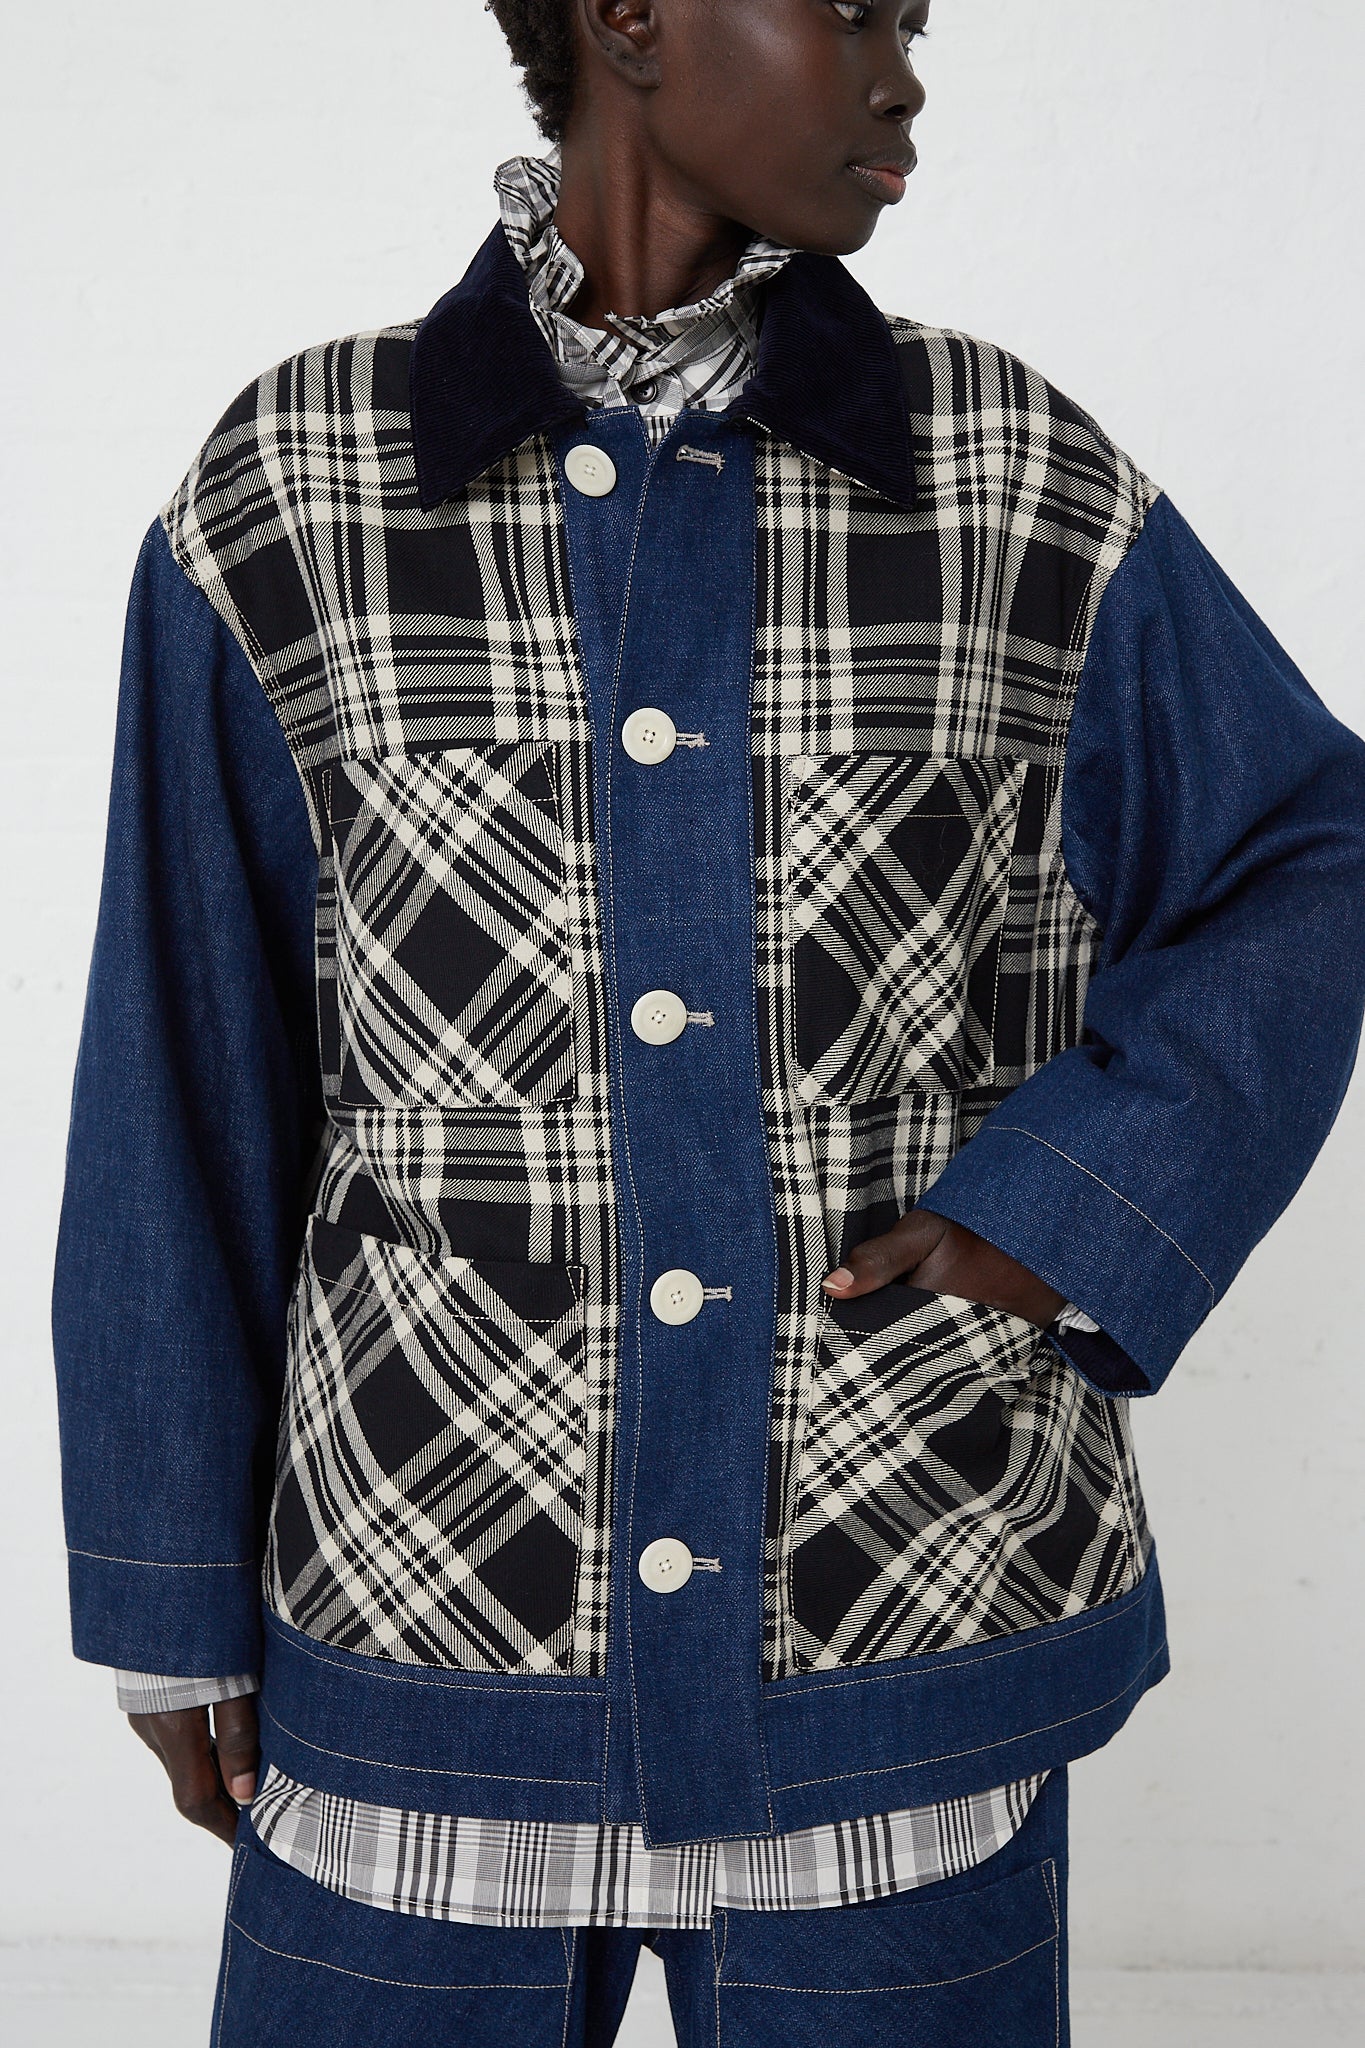 A woman in a KasMaria Japanese Denim Chore Jacket in Plaid, made of Japanese cotton, featuring a blue and black plaid pattern. Available at Oroboro Store in NYC.